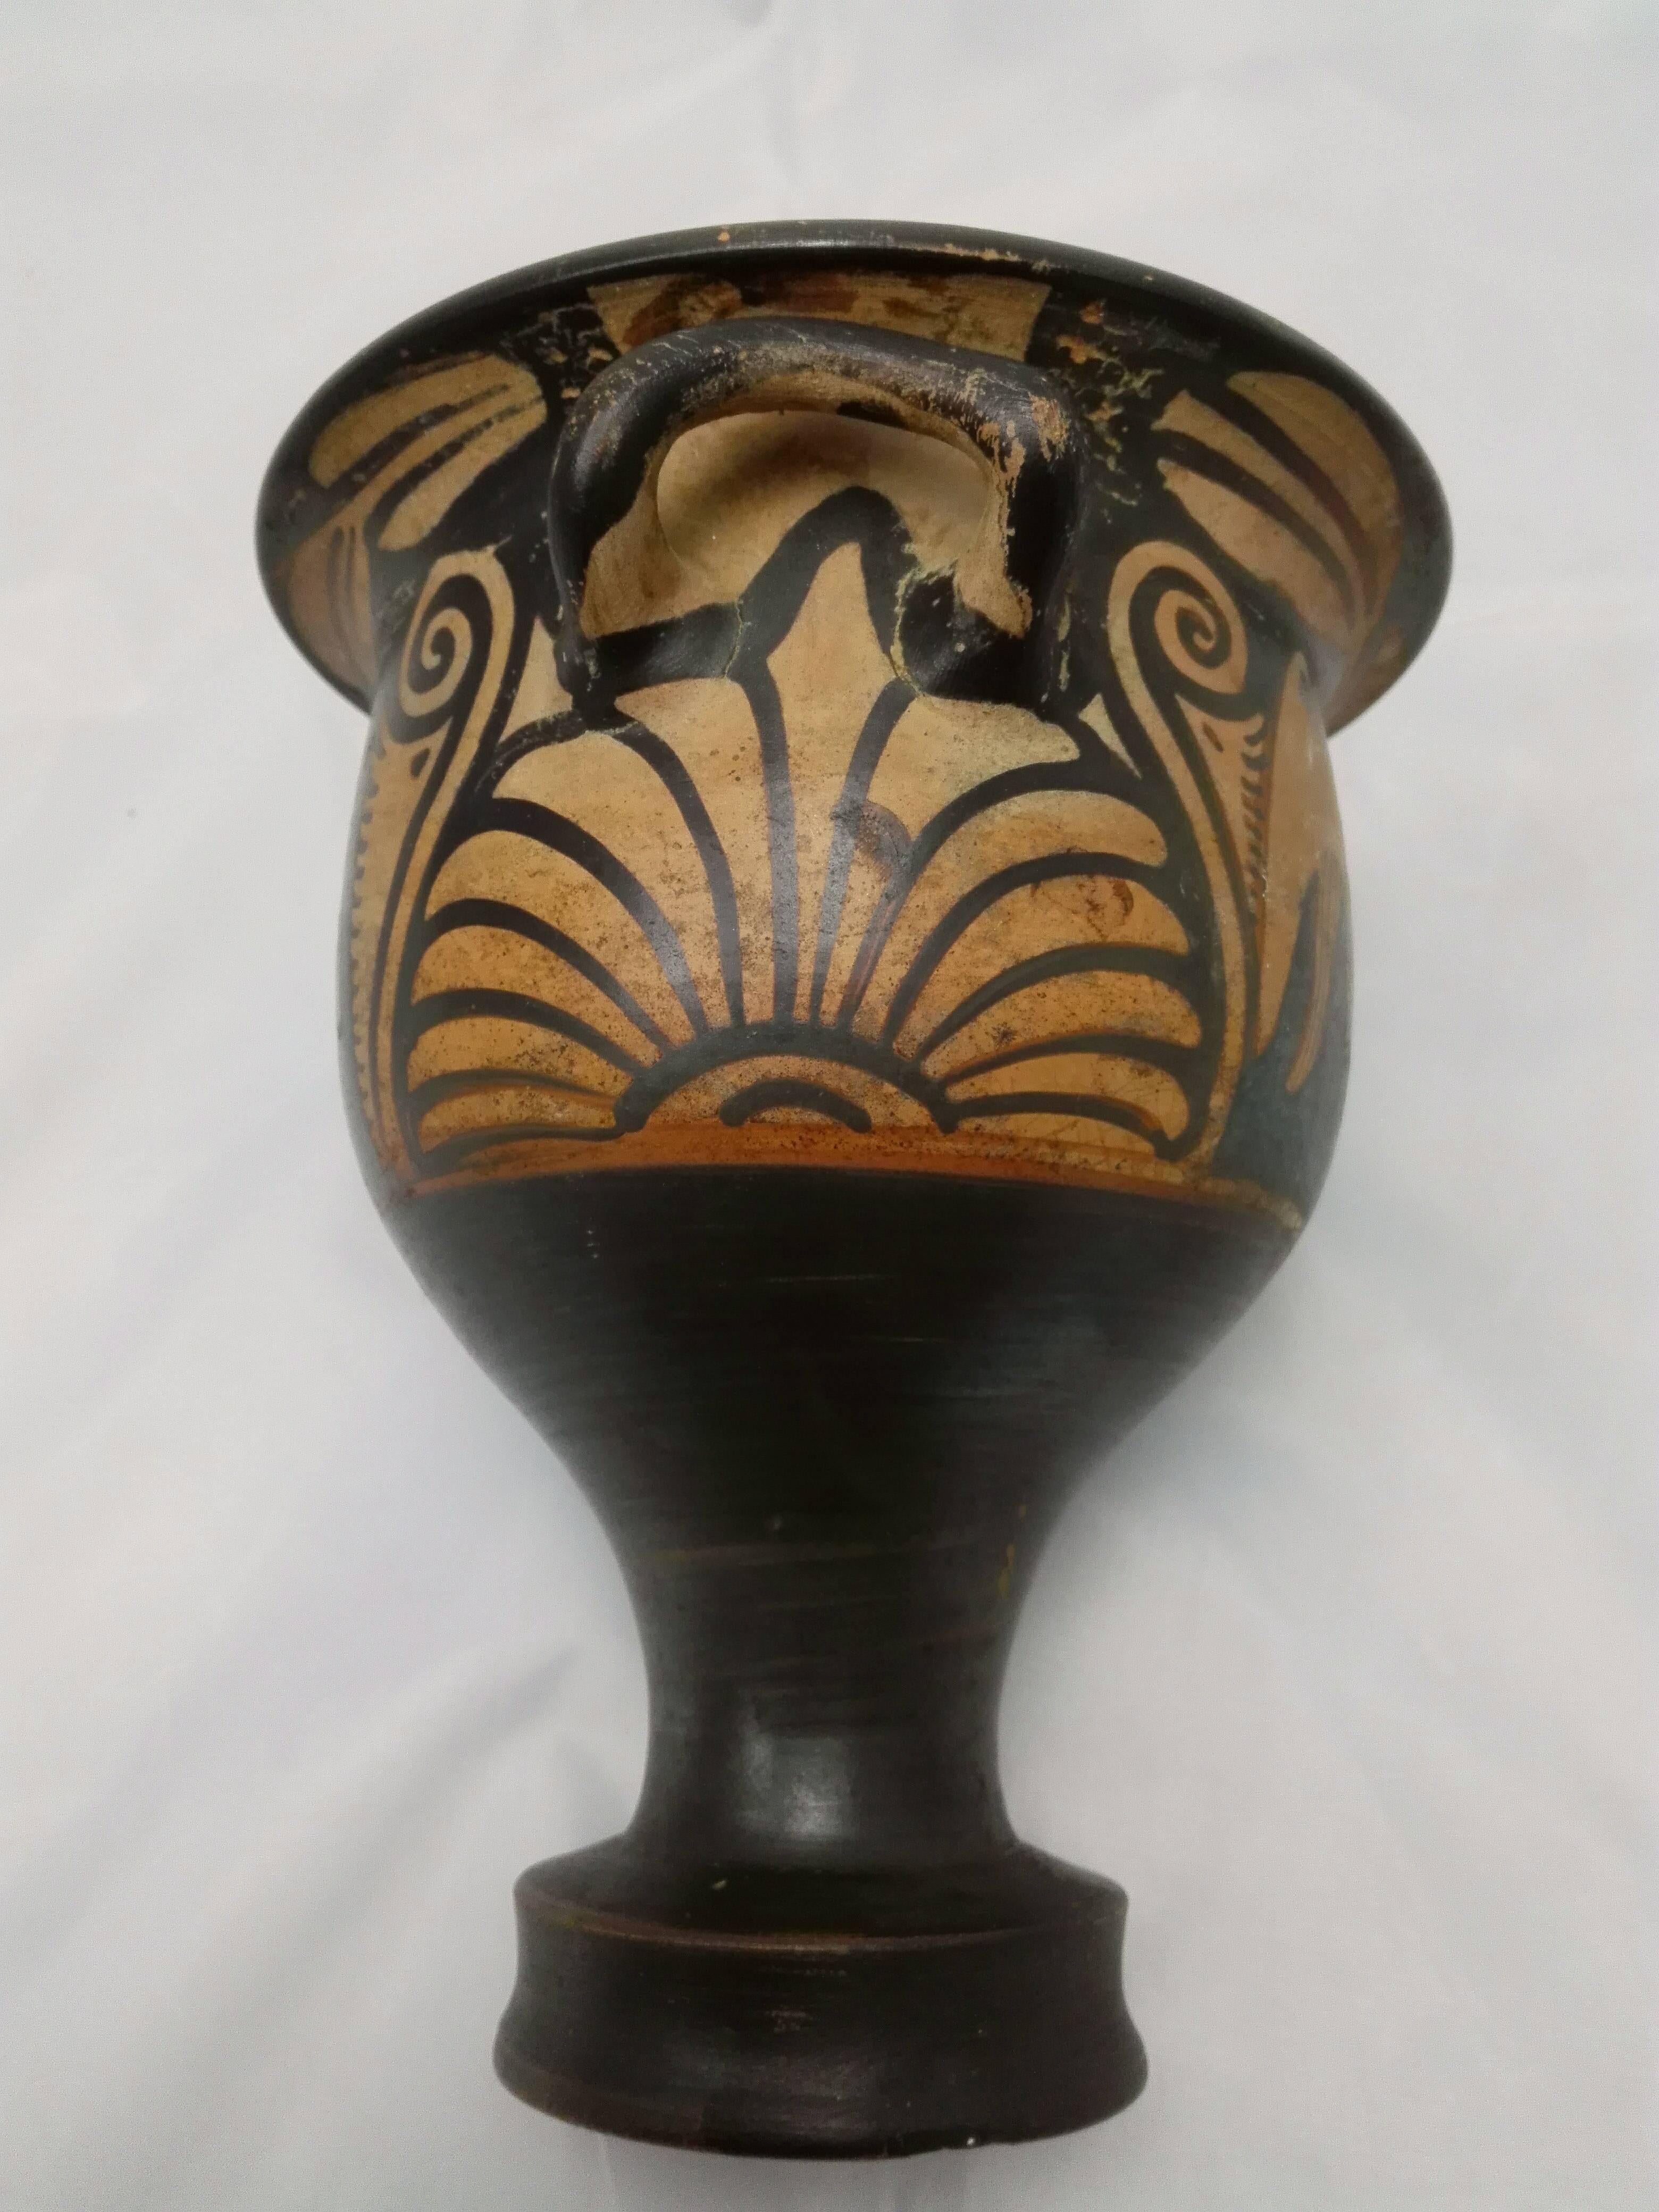 Apulian Classical Greek Bell Crater Wine Pottery Magna Graecia, South Italy In Fair Condition For Sale In Osnabrück, DE